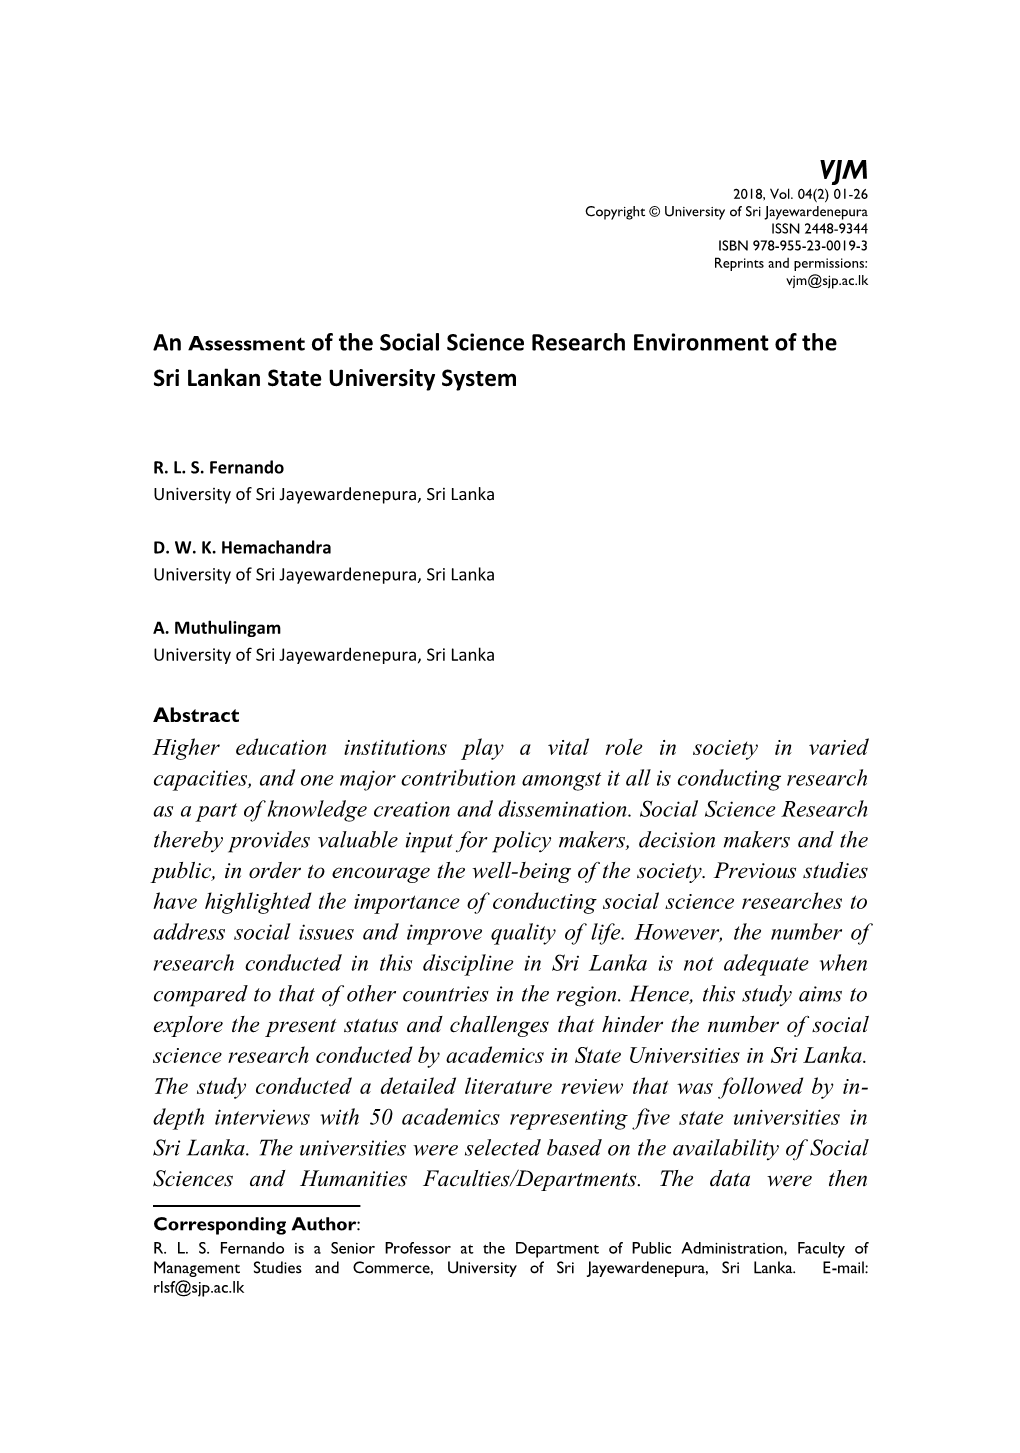 An Assessment of the Social Science Research Environment of the Sri Lankan State University System